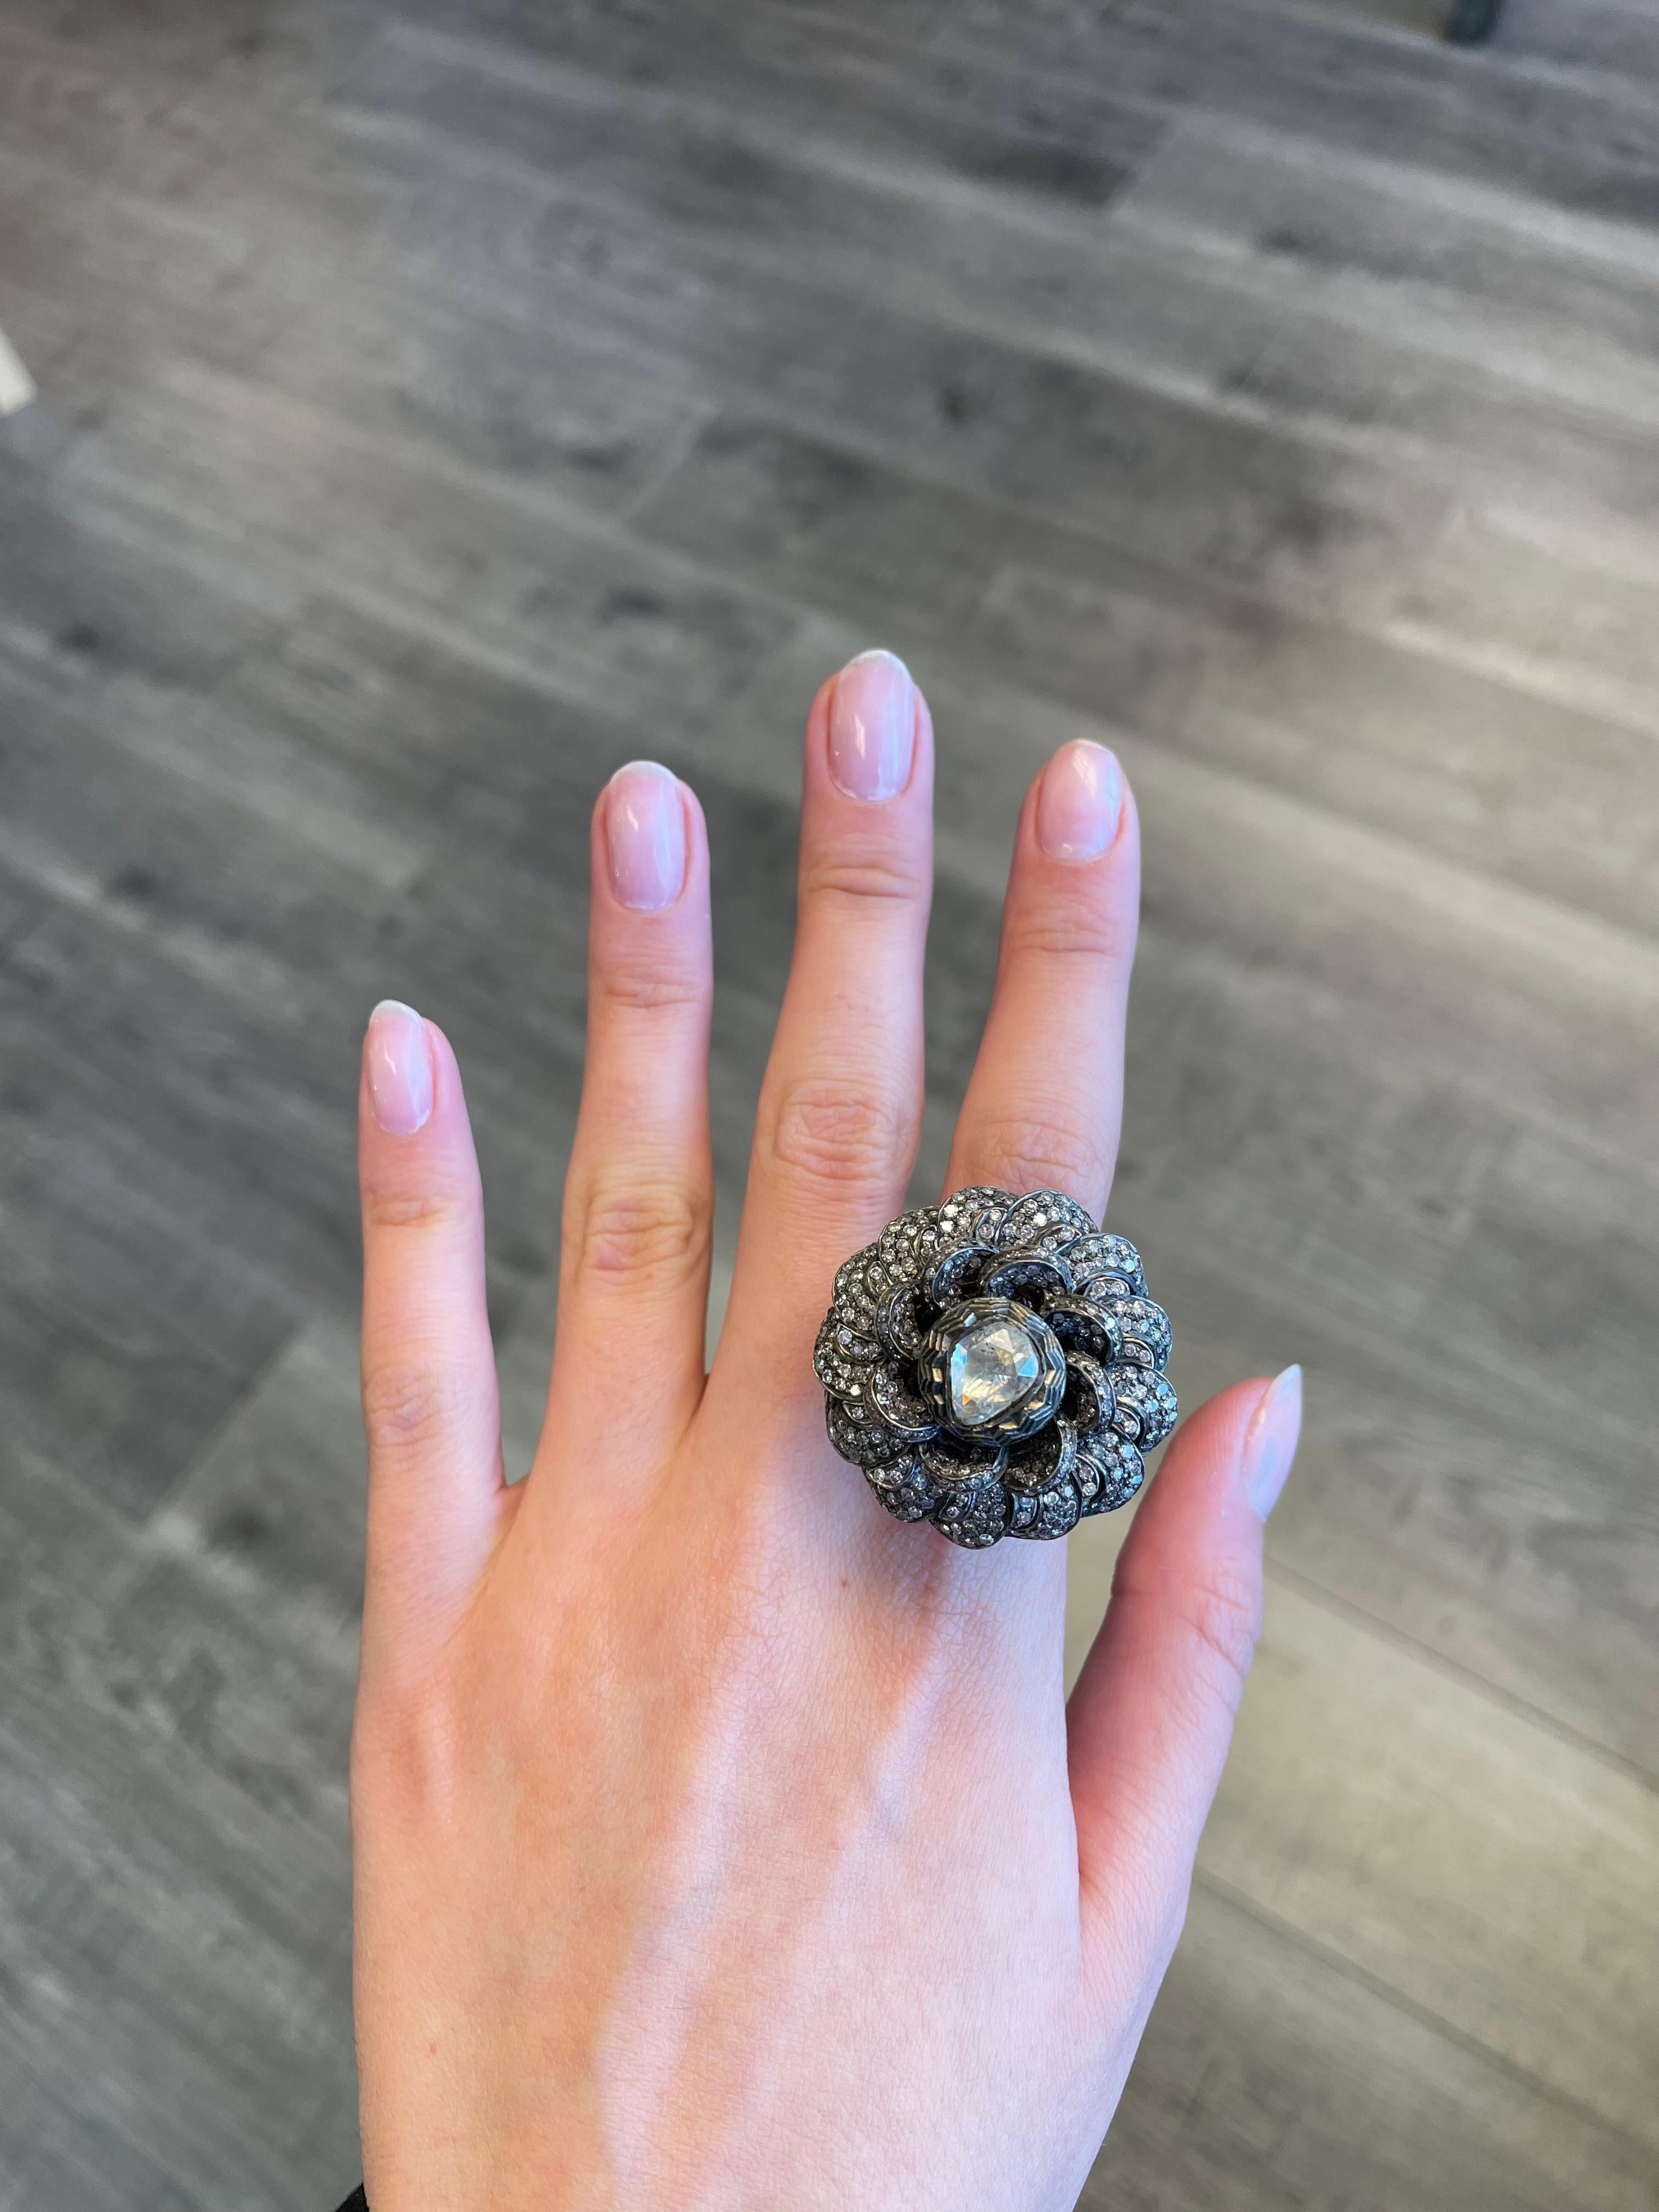 Vintage Victorian style floral diamond ring, with a pear cut diamond center stone.
Accommodated with an up to date appraisal by a GIA G.G. upon request. please contact us with any questions.

Item Number 
R8105